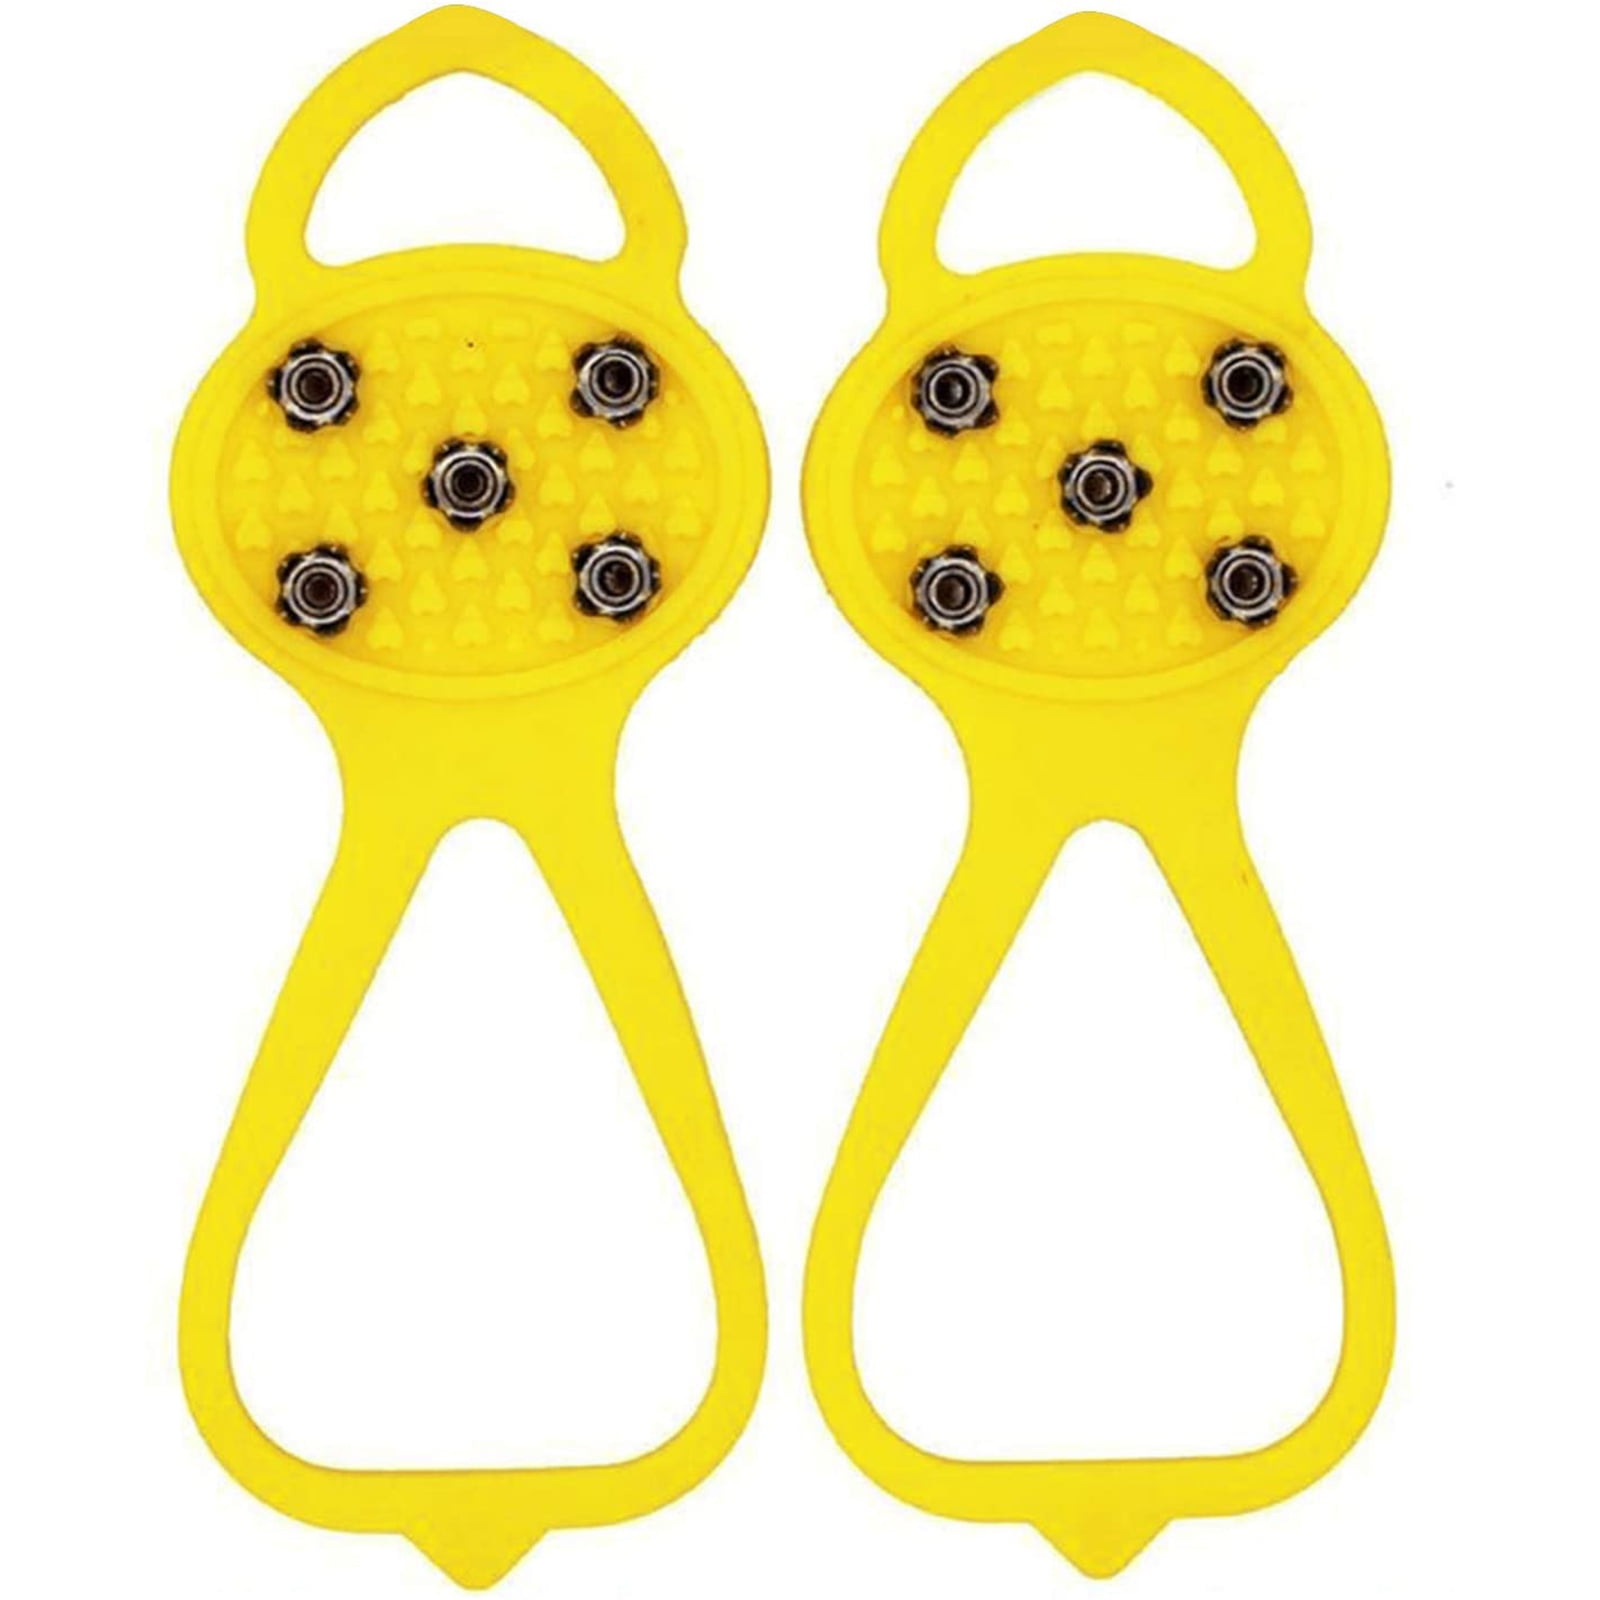 Toutek Ice Walk Traction Cleats, Crampons Grippers, Non Slip Spikes Cover (Yellow)